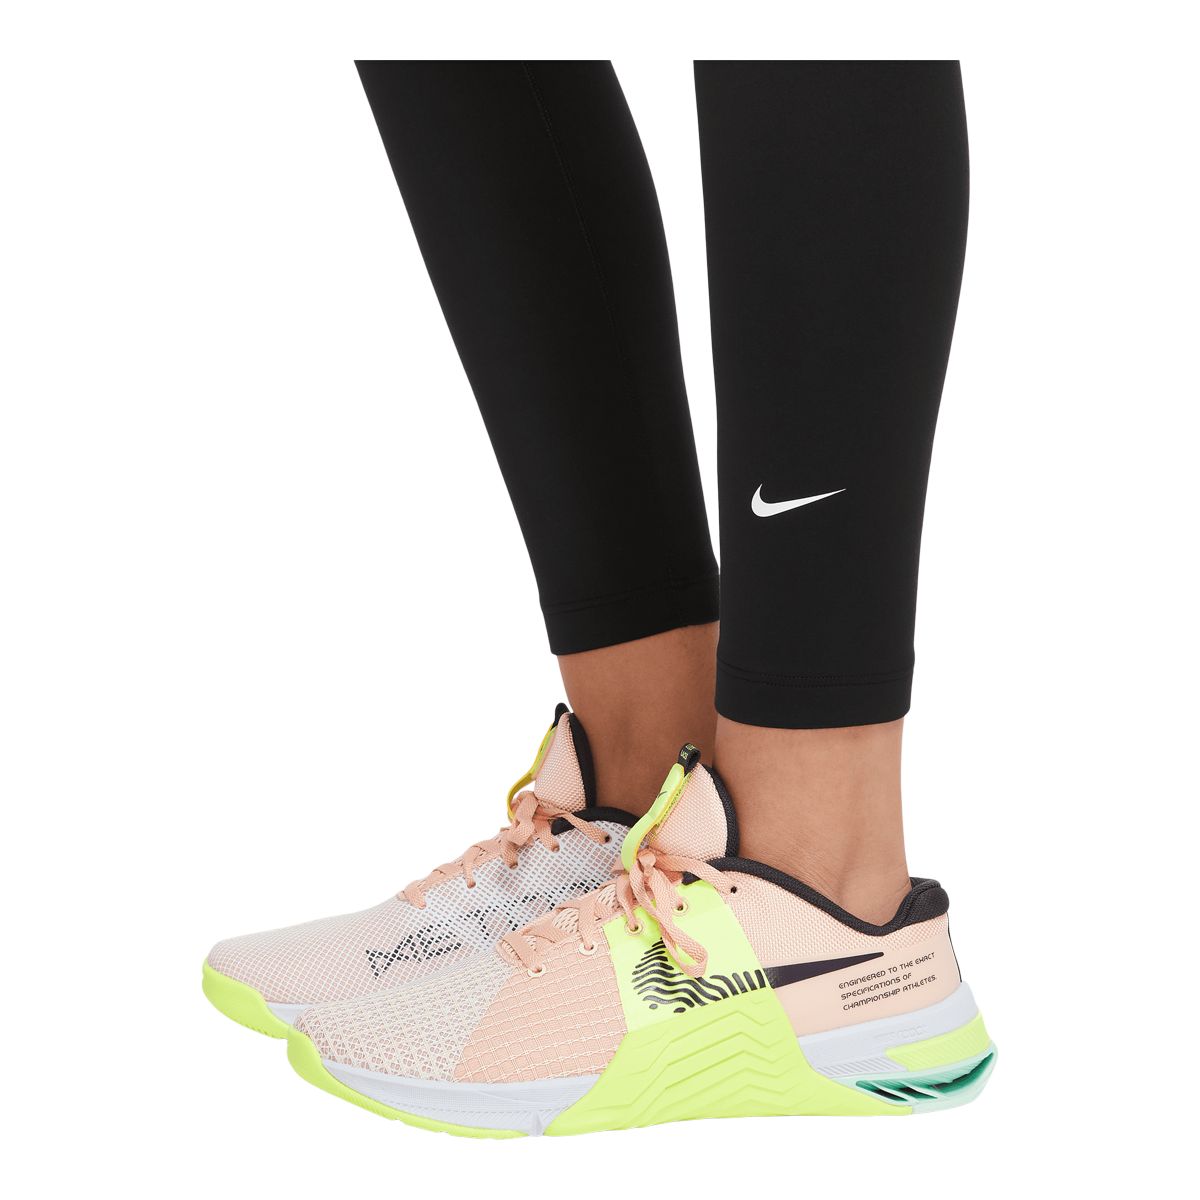 Nike Therma-FIT One Graphic Training Leggings